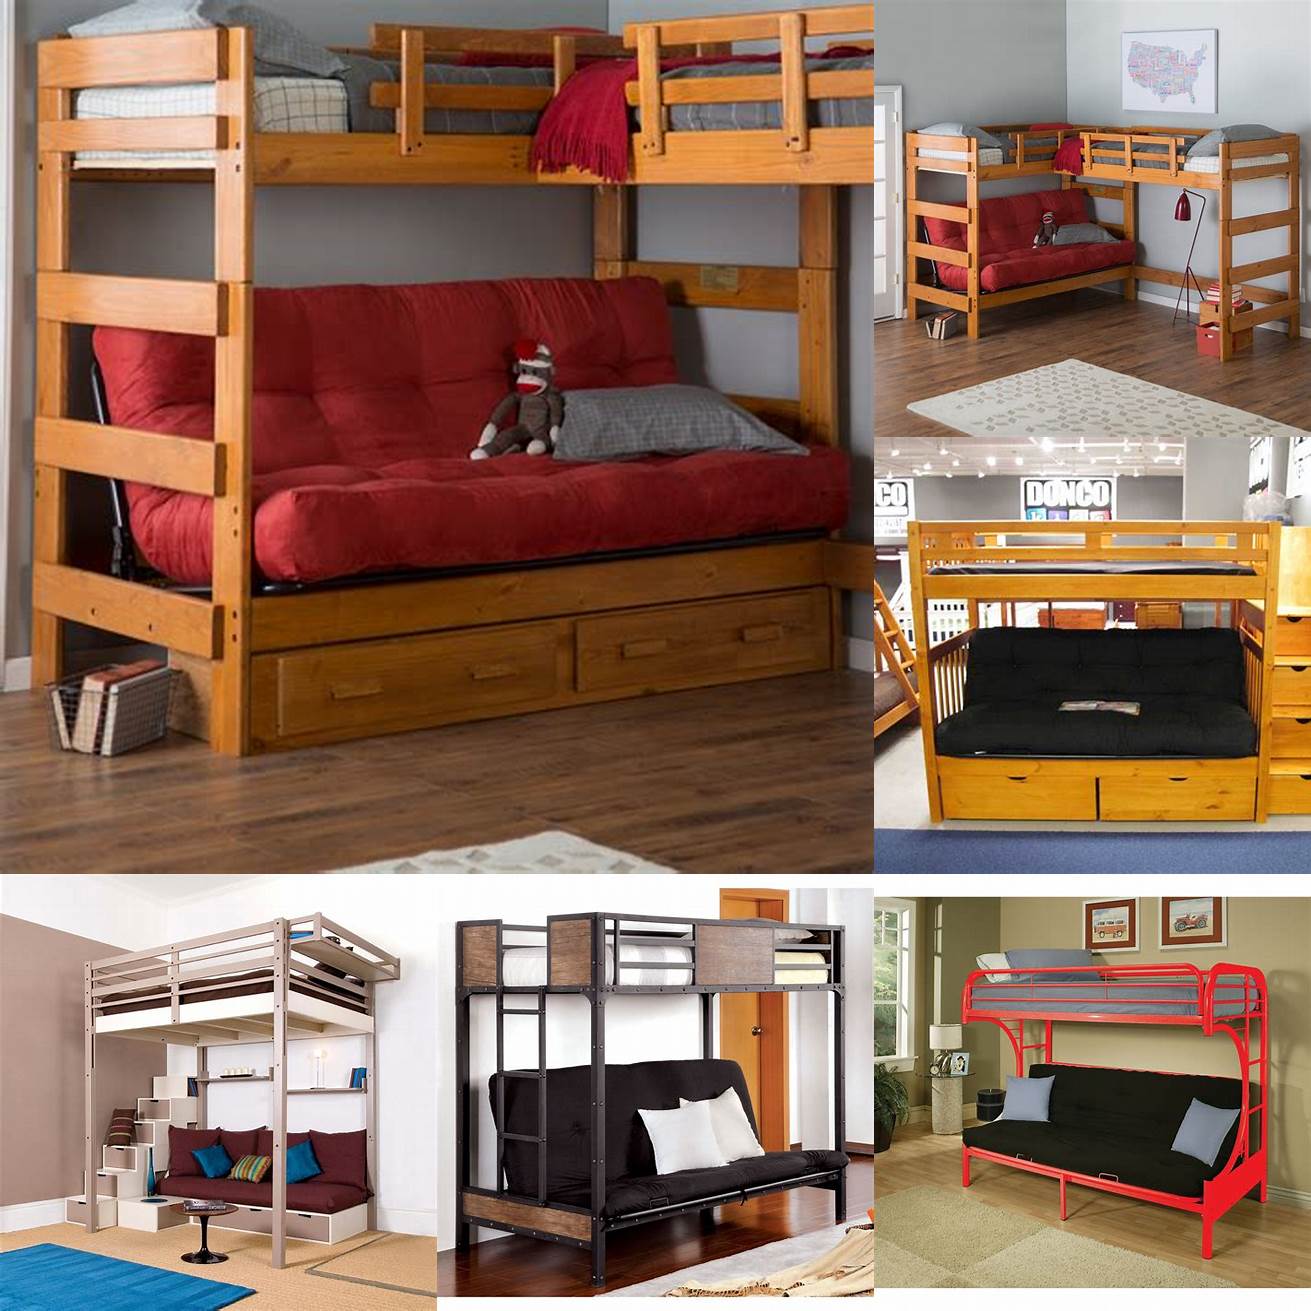 A loft bed with a futon underneath that can be used for seating or as an extra bed